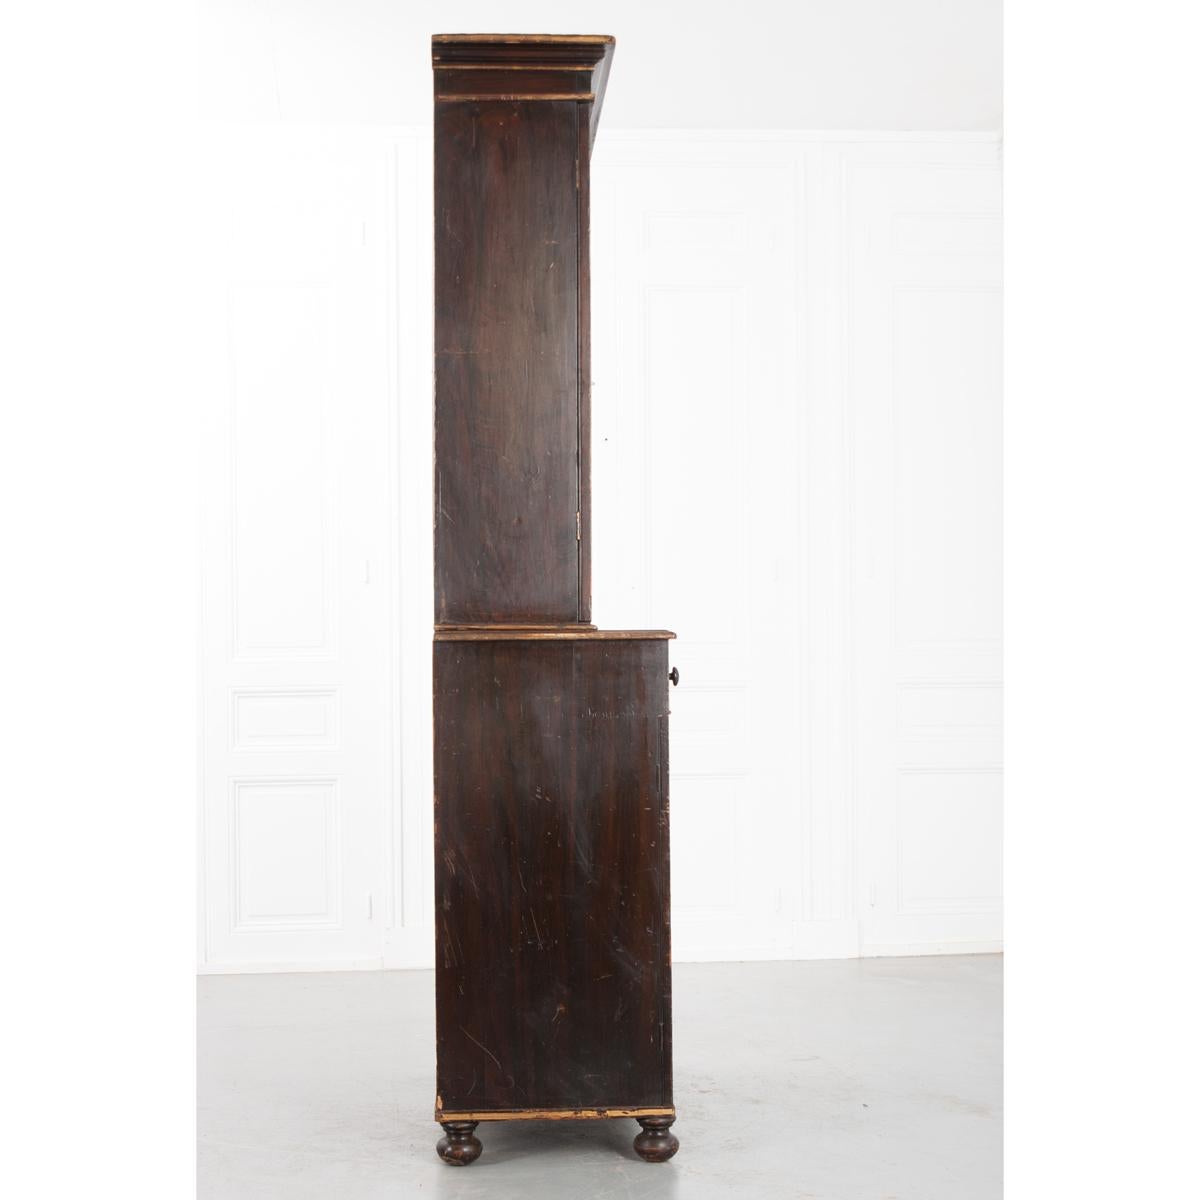 A warm and rich four door faux bois bookcase with a wonderful distressed quality, c. 1890. This painted piece features accented details in the mouldings and trim. The top section has two divided light, glass-front locking and latching doors that